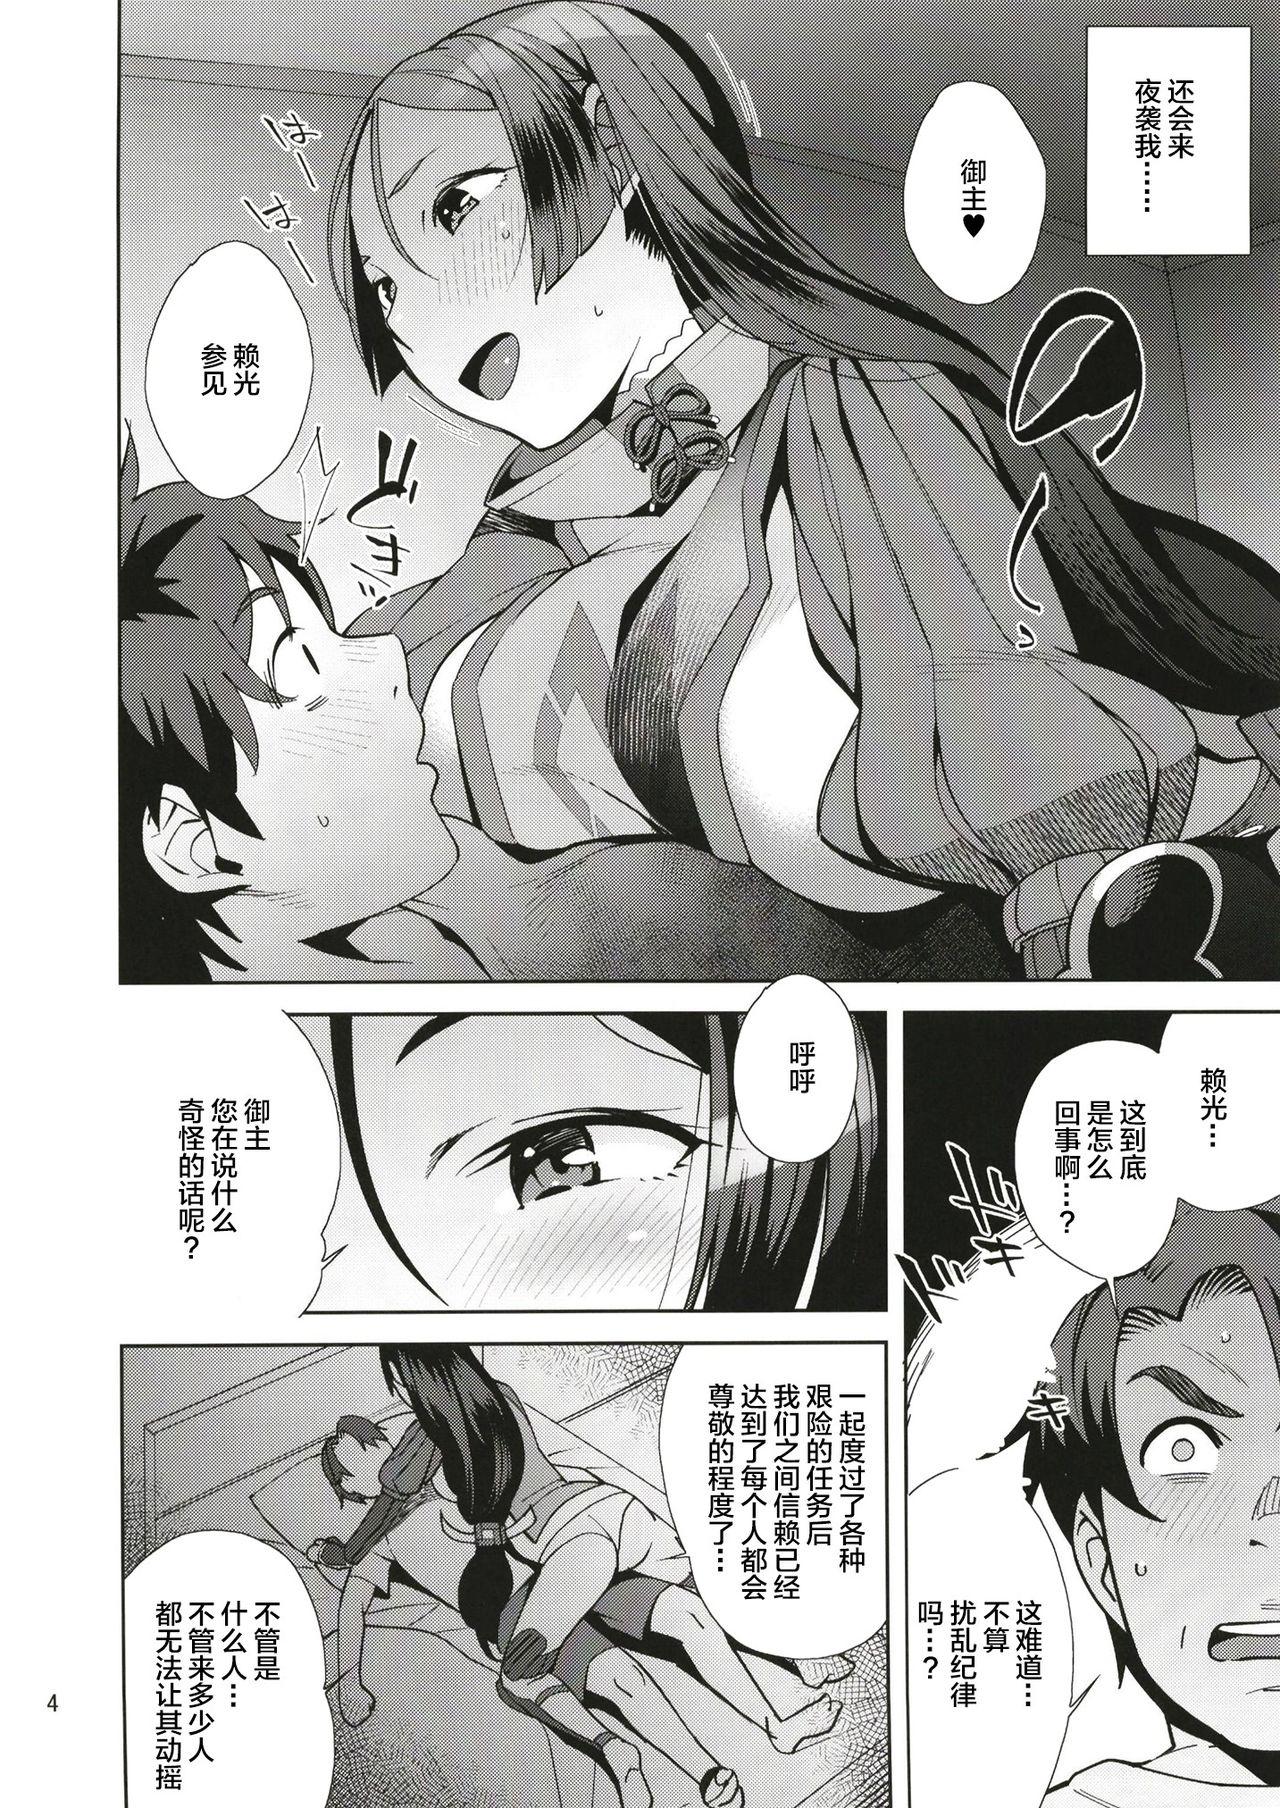 Doggystyle Raikou Sentimental - Fate grand order Cougars - Page 3